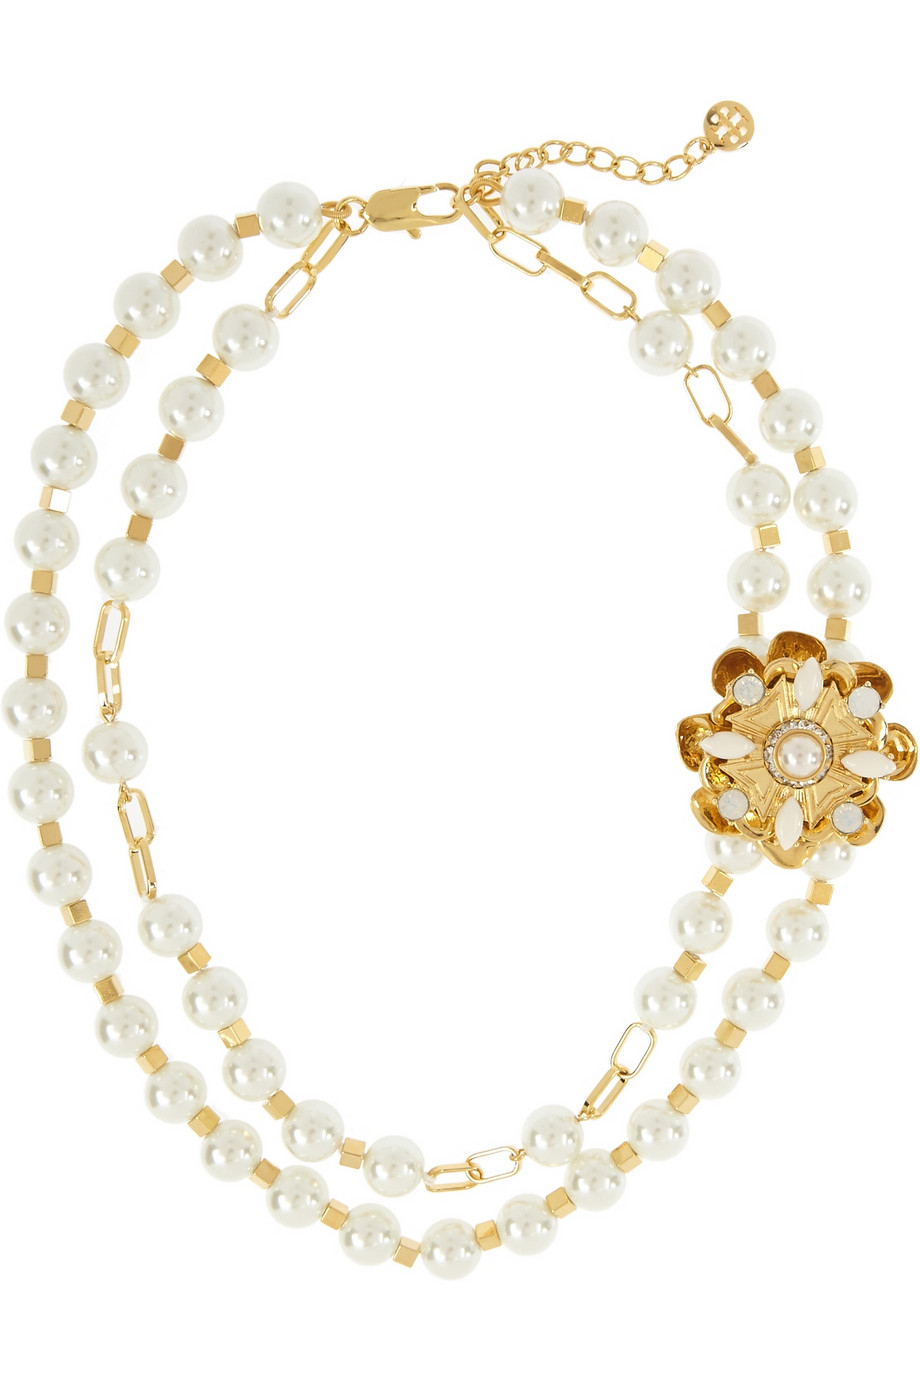 Tory burch Tilde Gold-Plated, Faux Pearl And Crystal Necklace in White ...